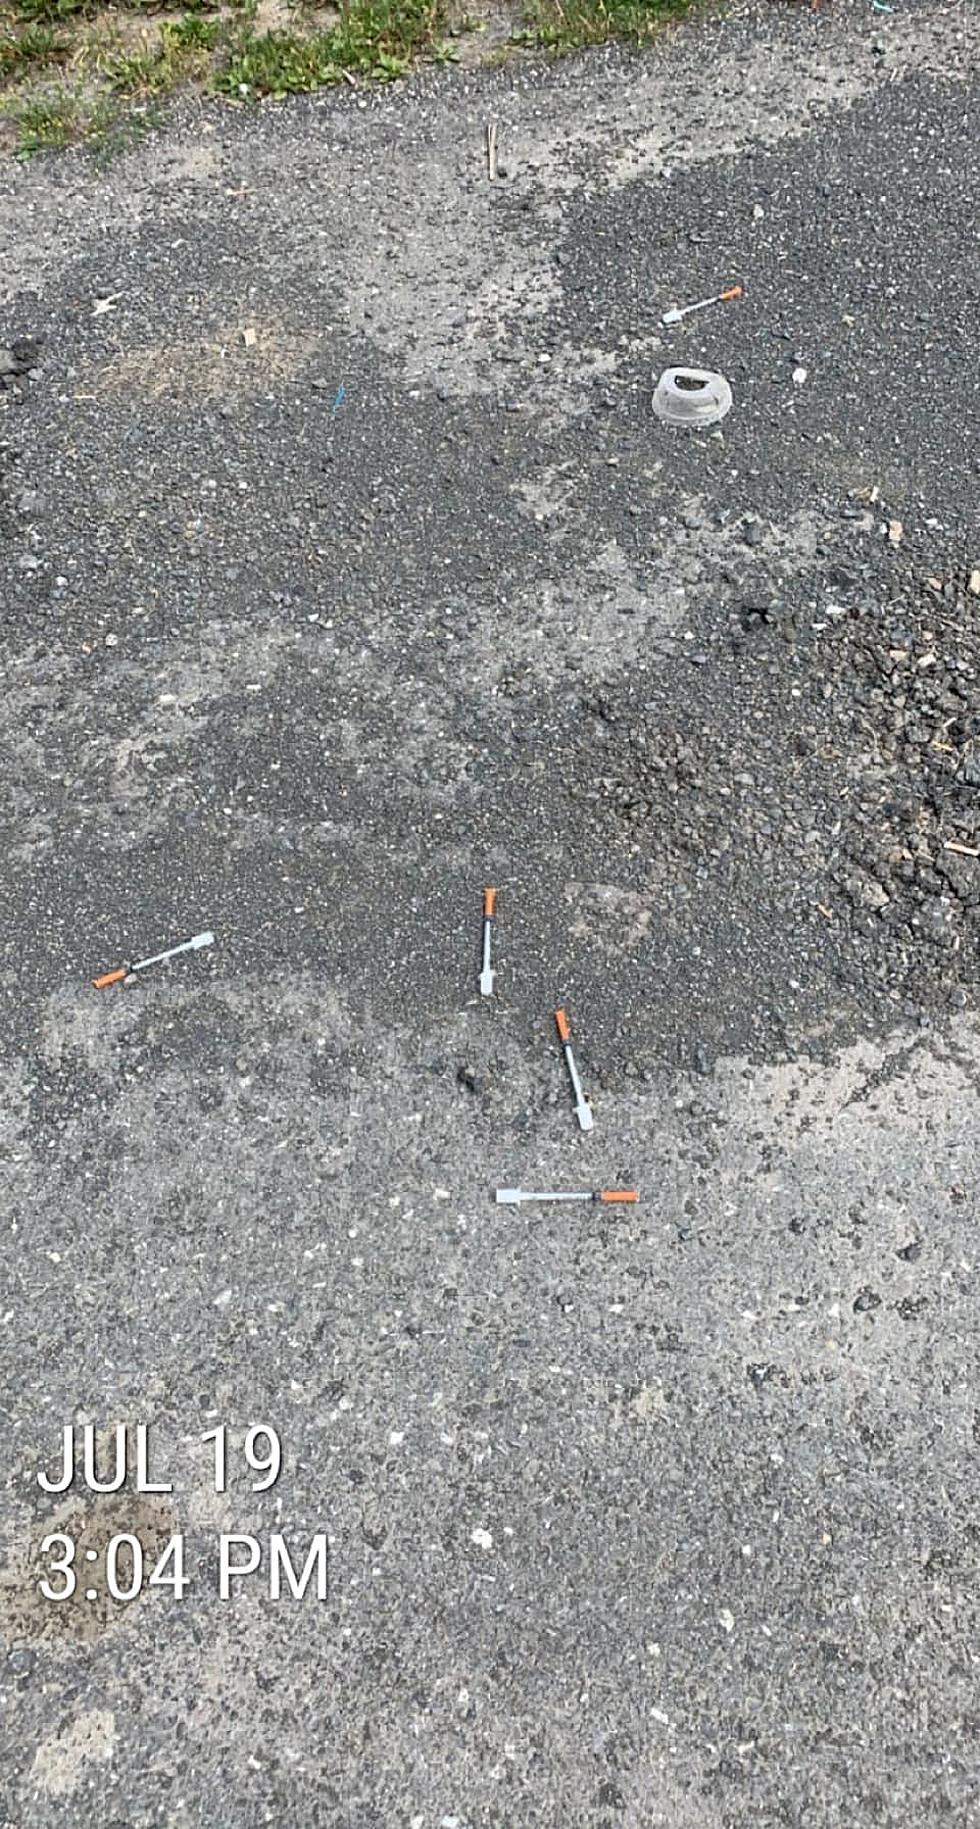 Needles on Riverside Drive in Presque Isle are Becoming a Problem